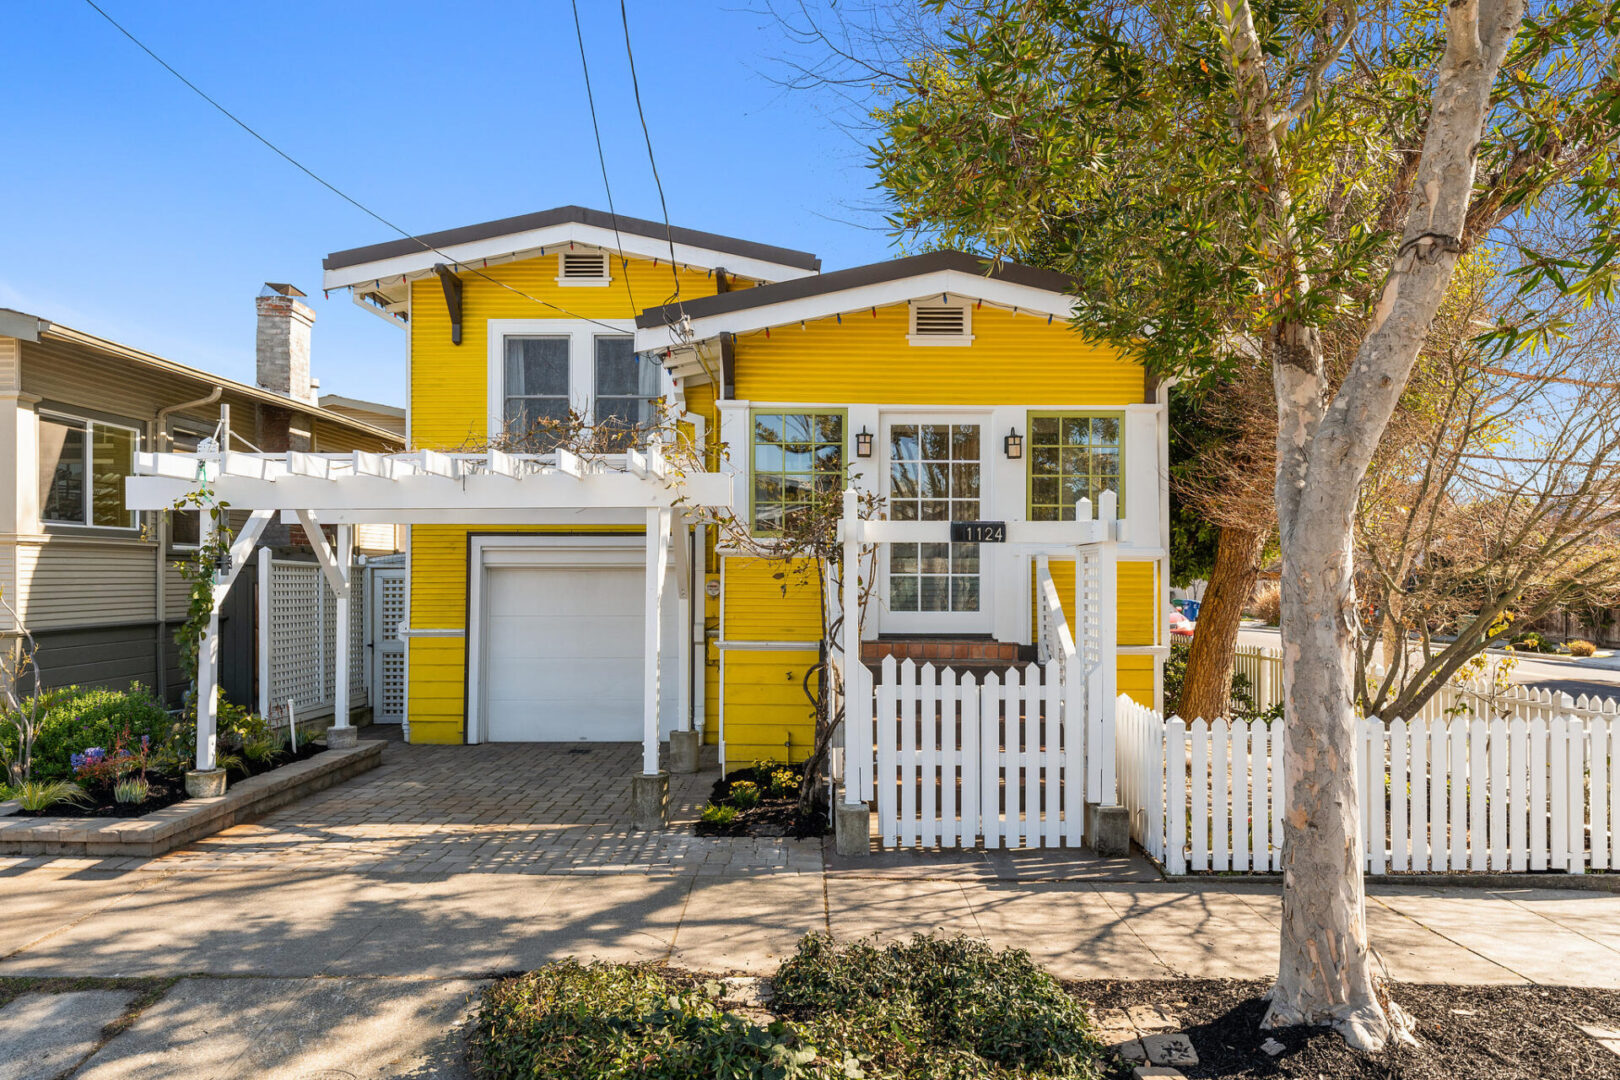 A yellow house with white trim and a picket fence.